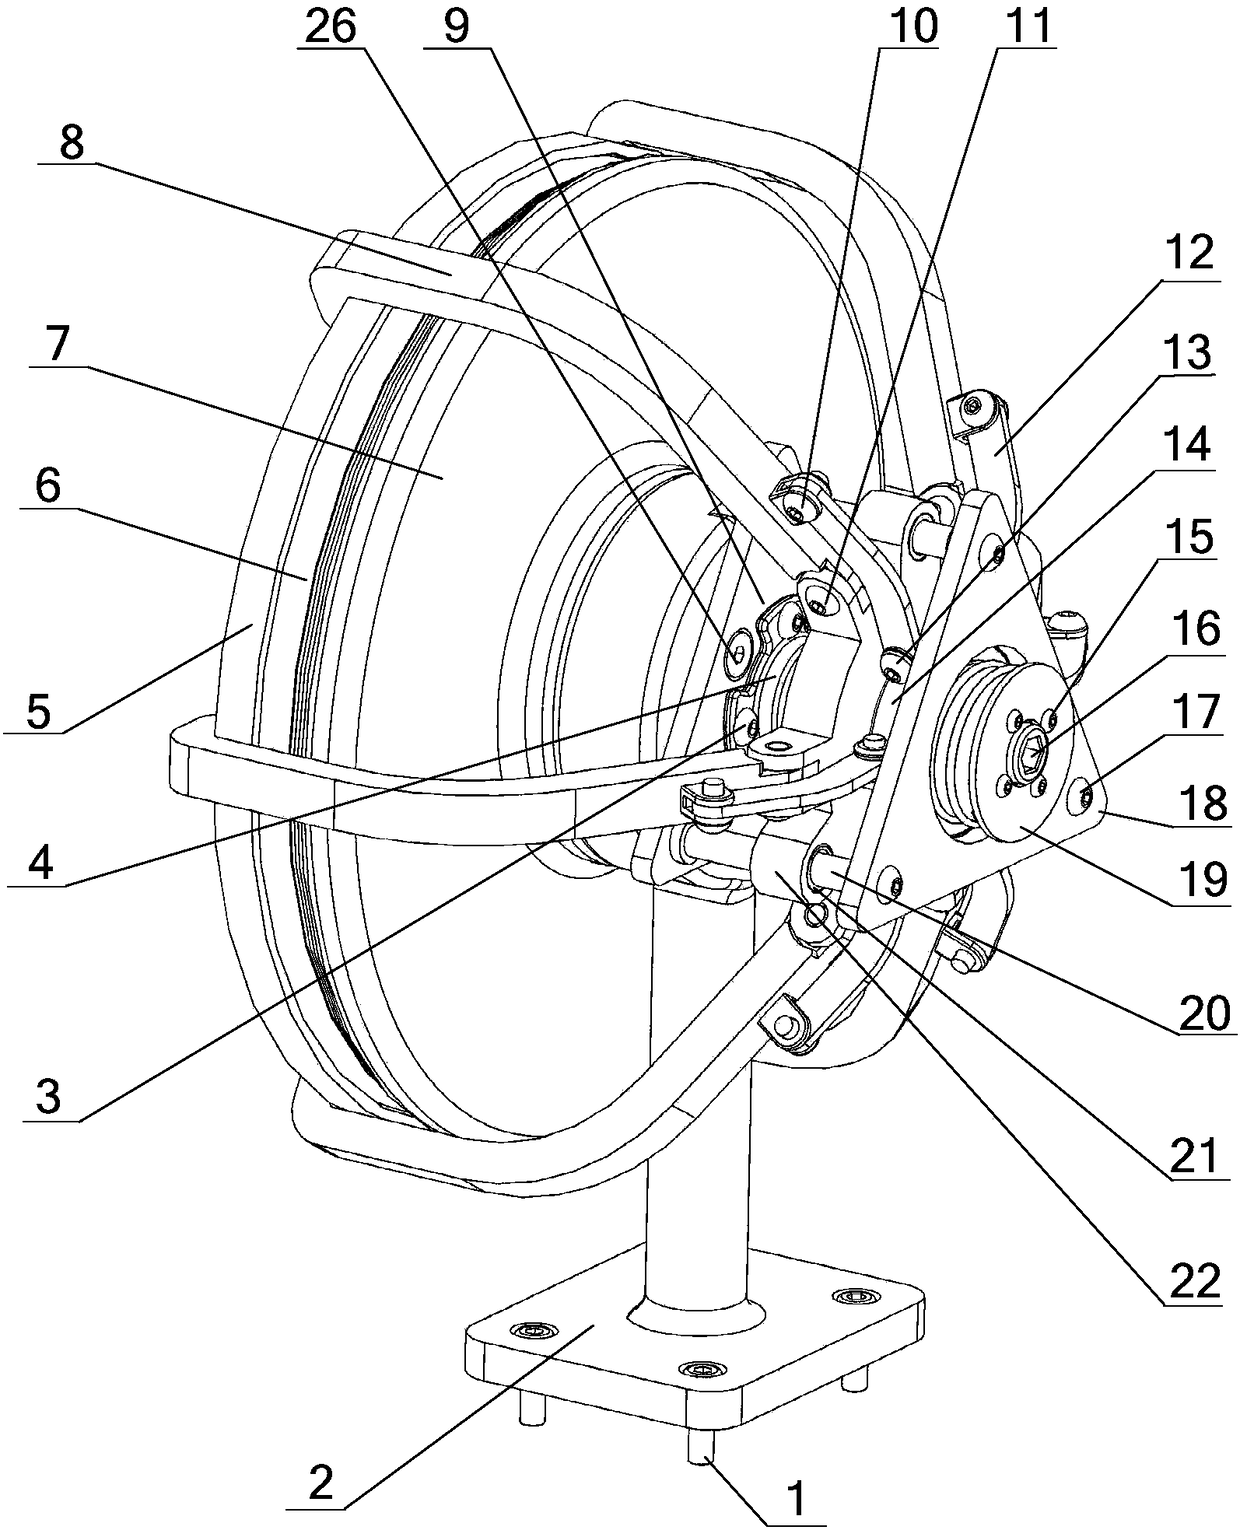 Rapid clamping device